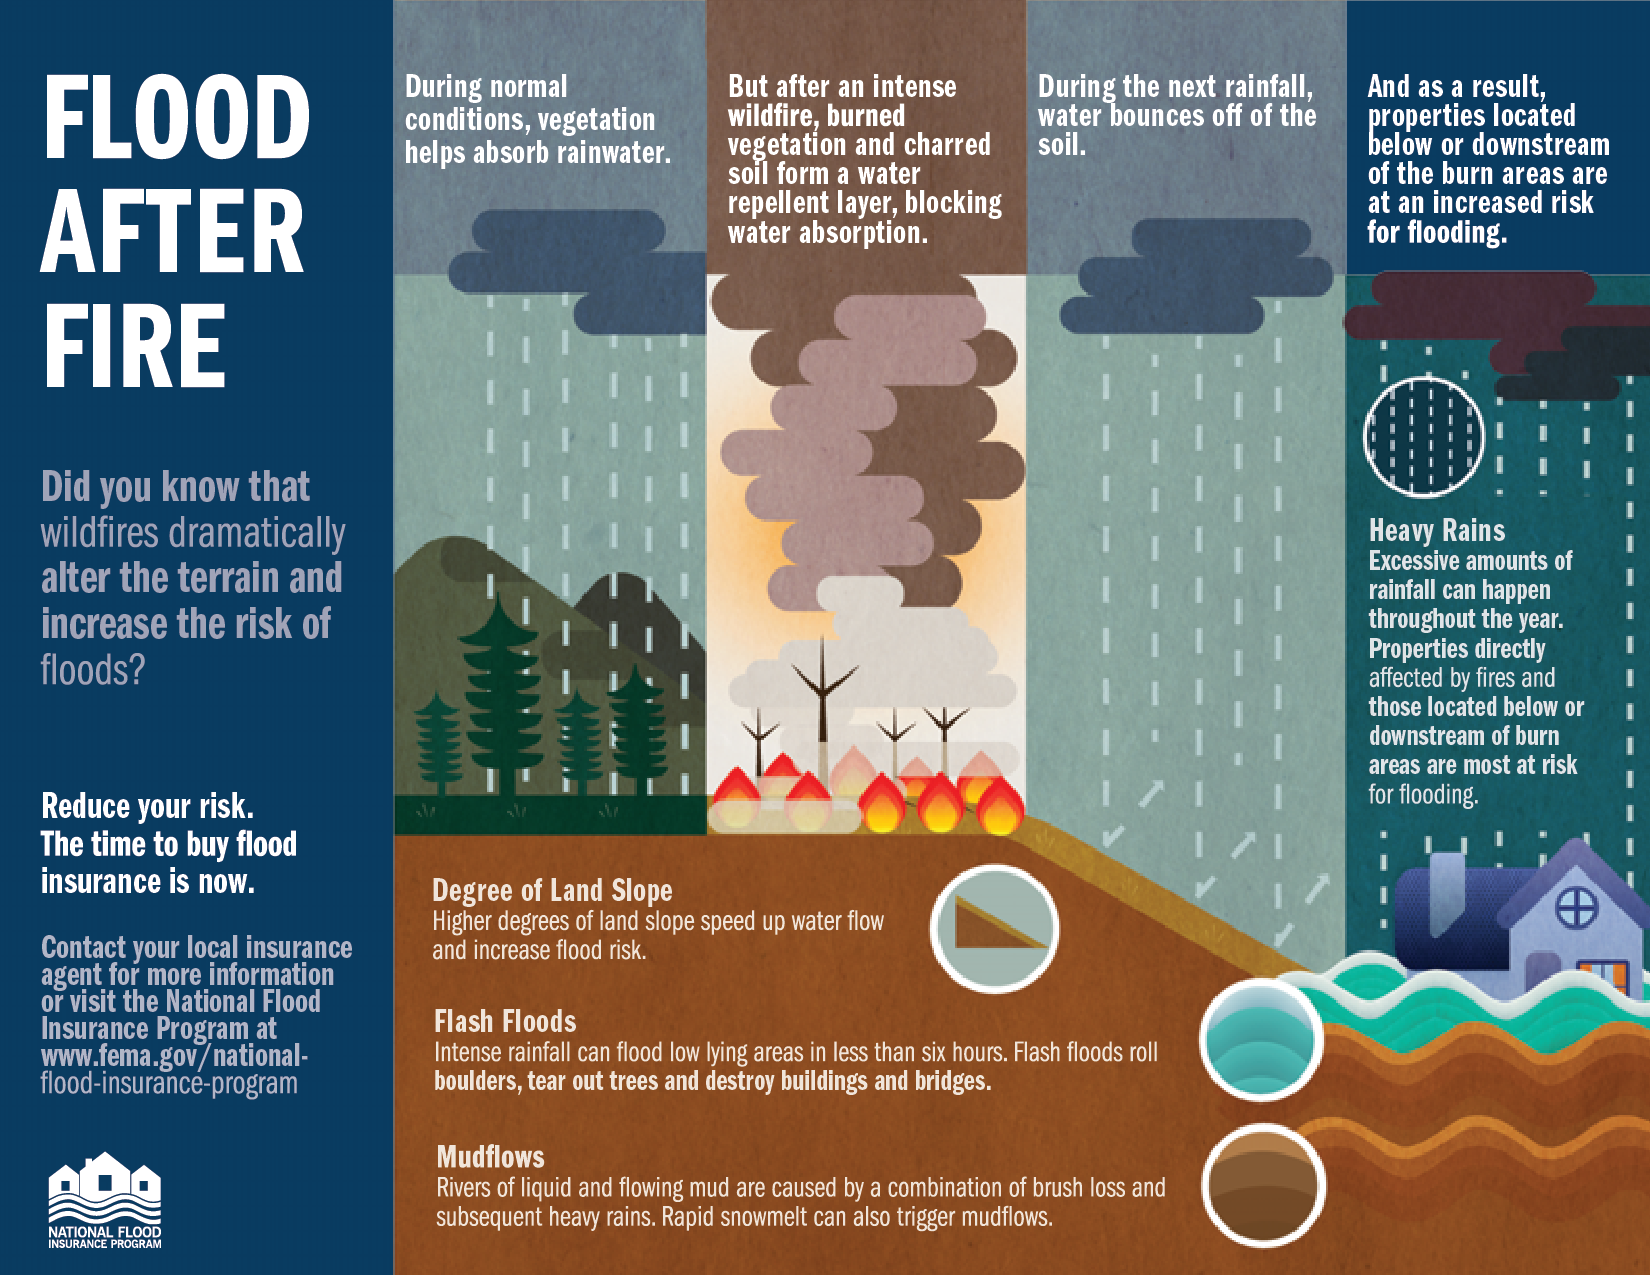 The infographic shows a hillside with trees and vegetation. During normal conditions, vegetation helps to capture rainwater. But after an intense wildfire, burned vegetation and charred soil form a water-repellant layer, blocking water absorption. During the next rainfall, water bounces off of the soil. And as a result, properties located below or downstream of the burn areas are at an increased risk for flooding. 